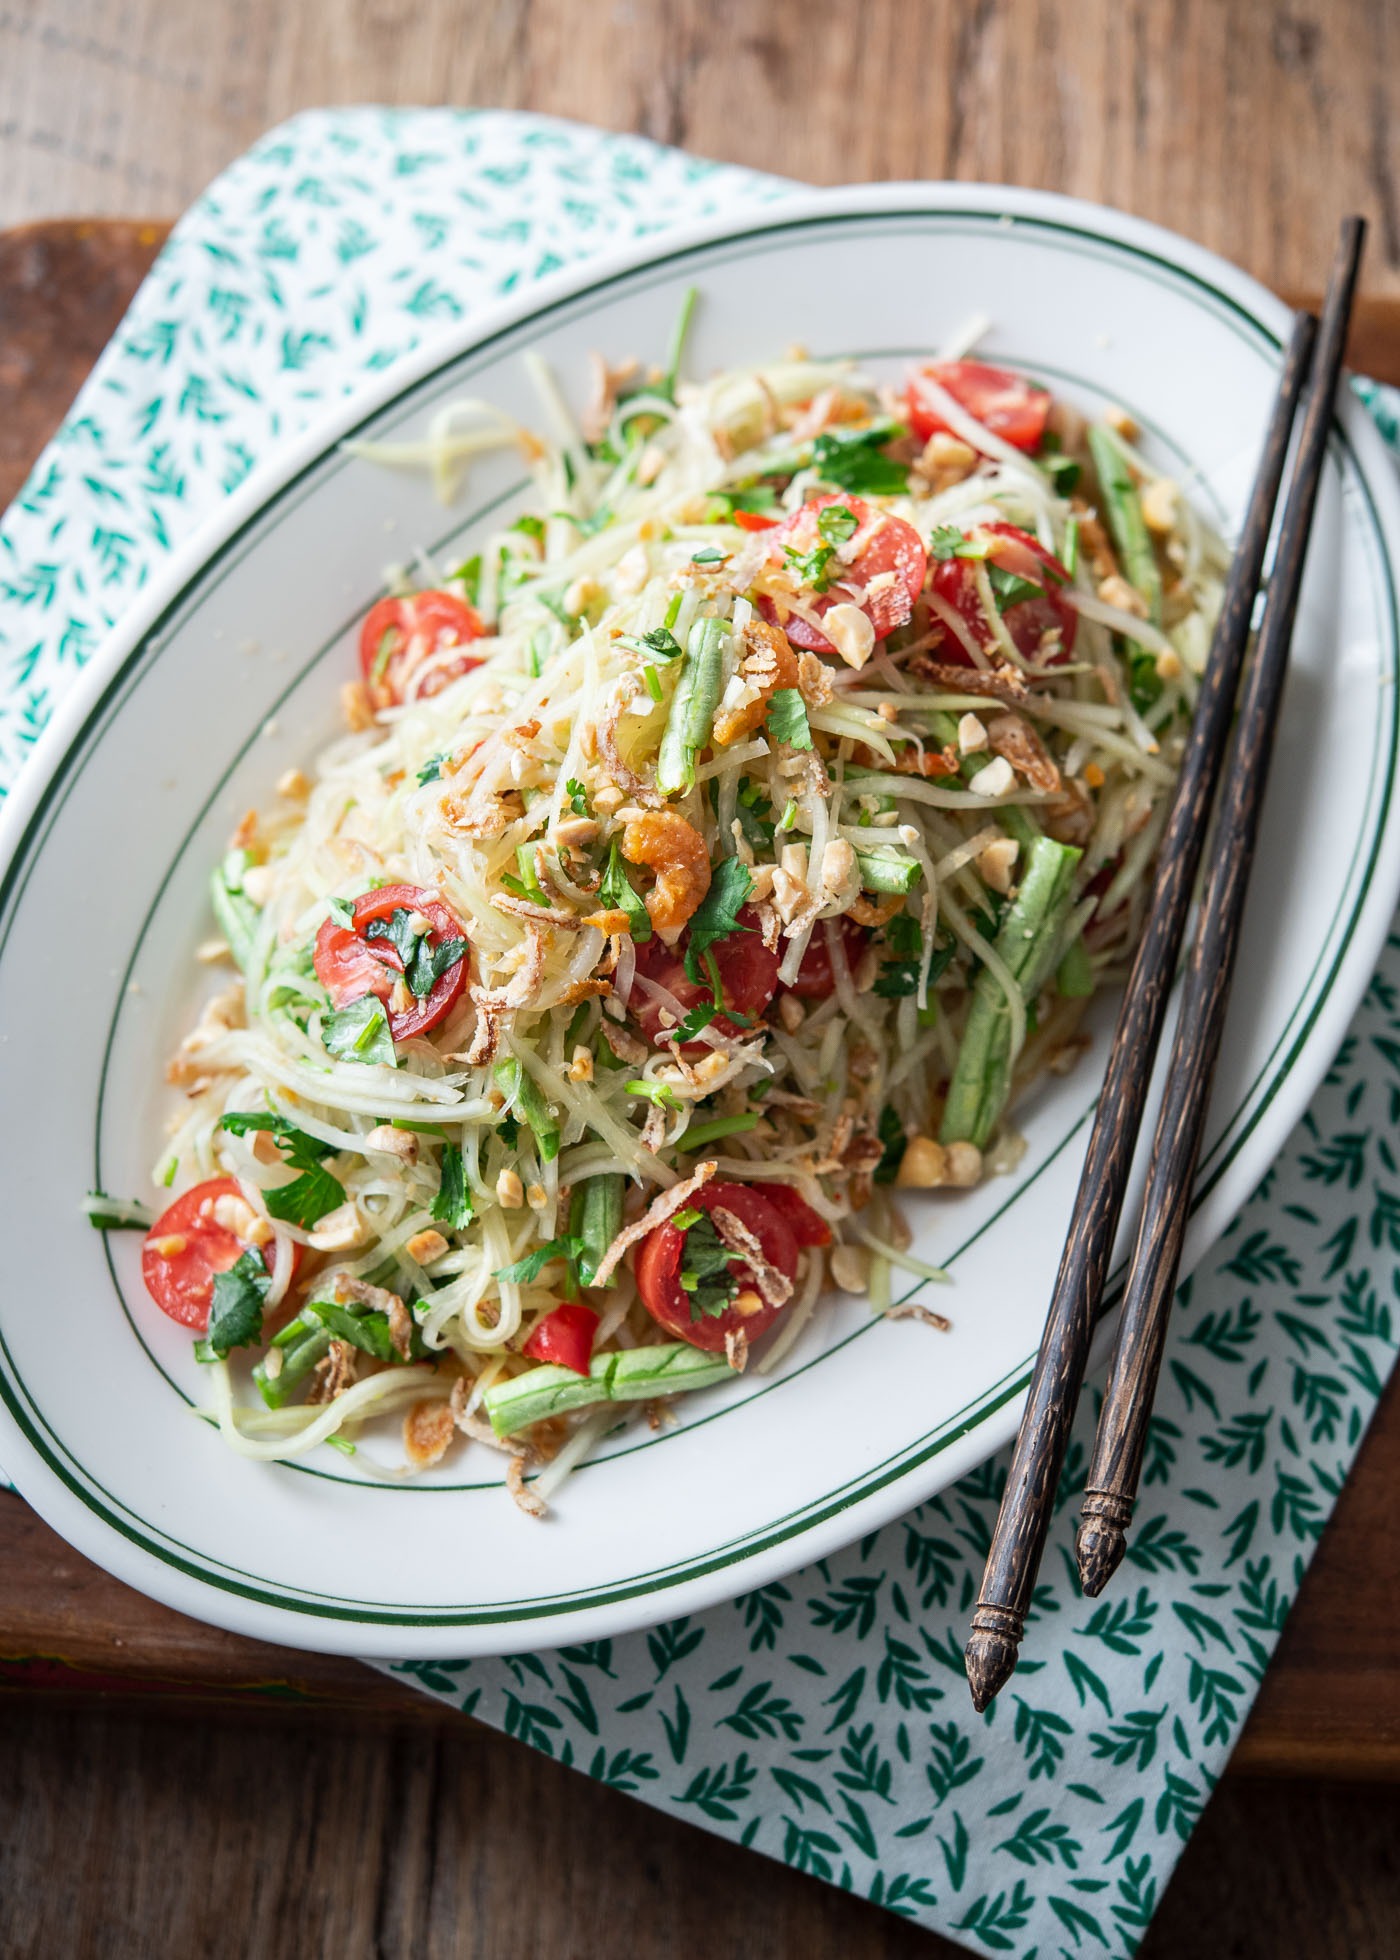 A plate of Thai papaya salad (som tam) garnished with tomato and crushed peanuts.